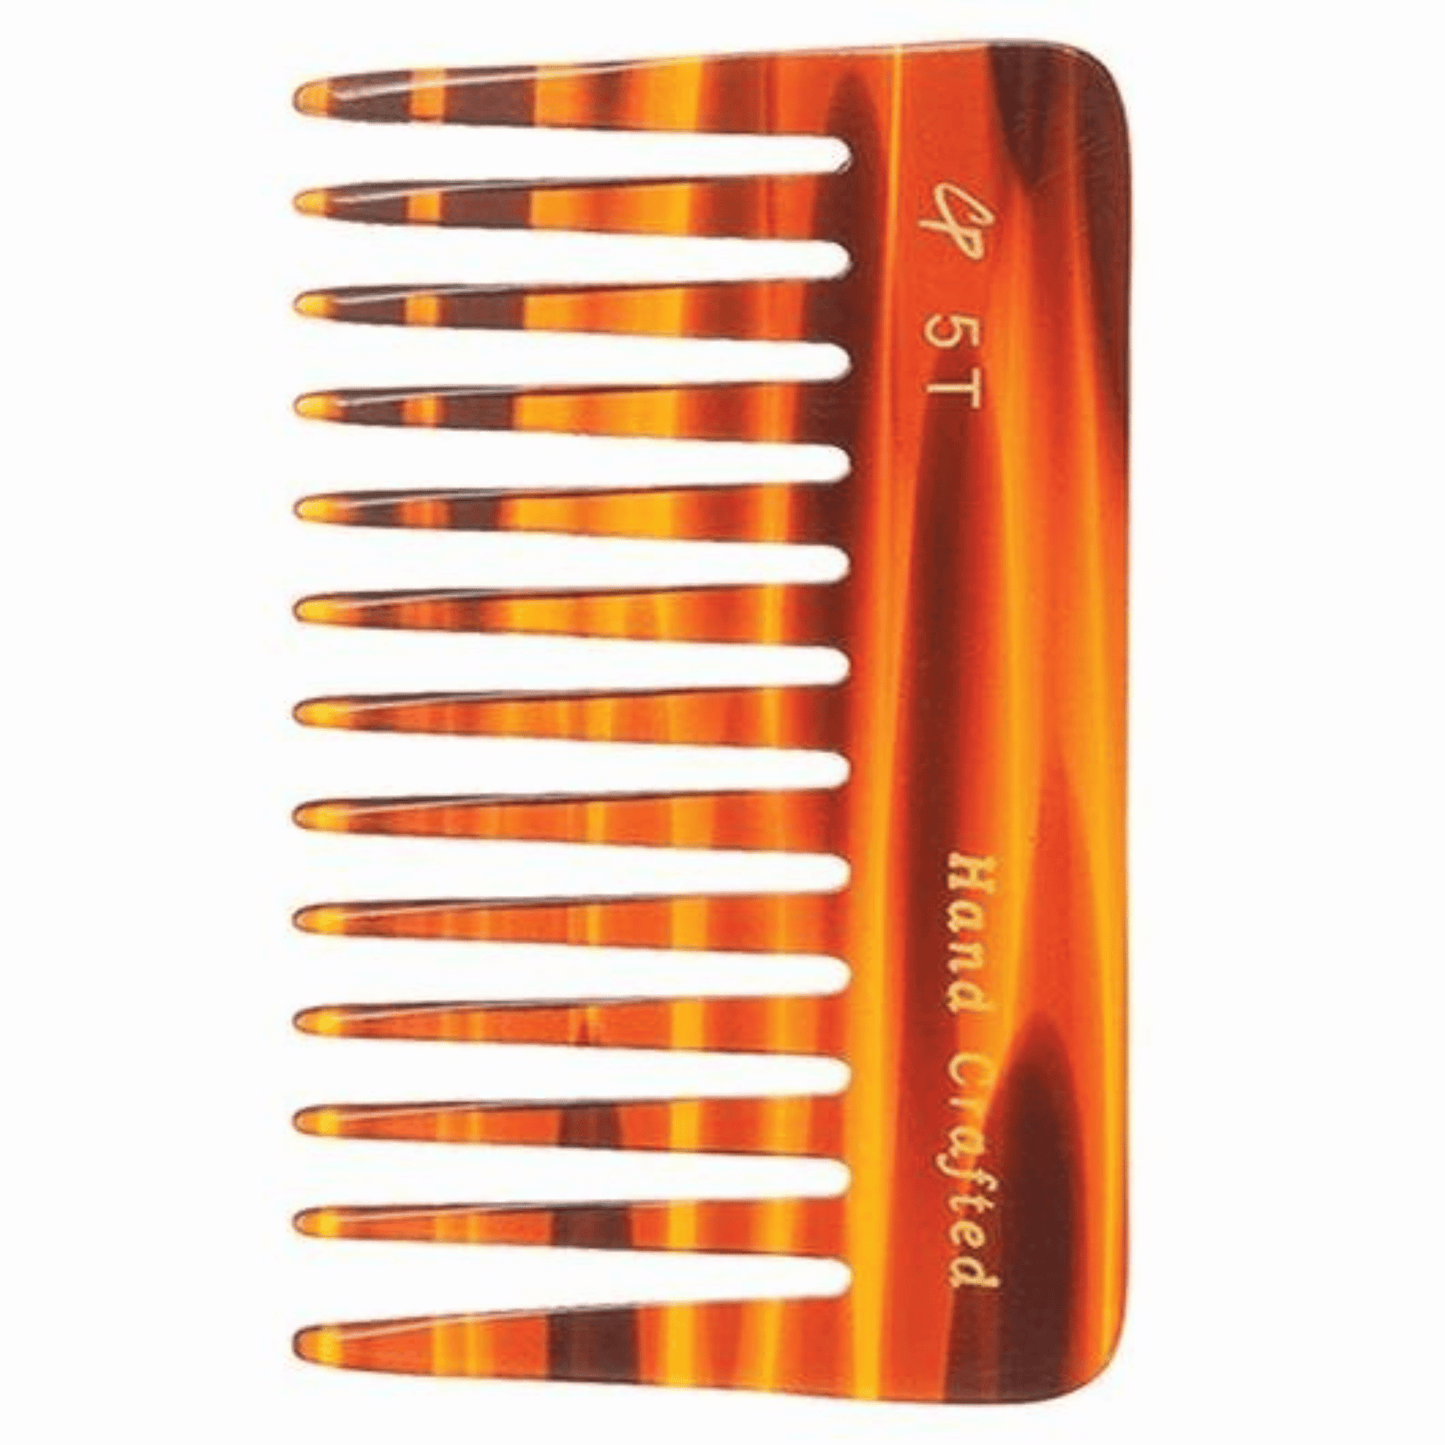 Primary Image of Wide Tooth 4 inch Tortoise Comb - C5T